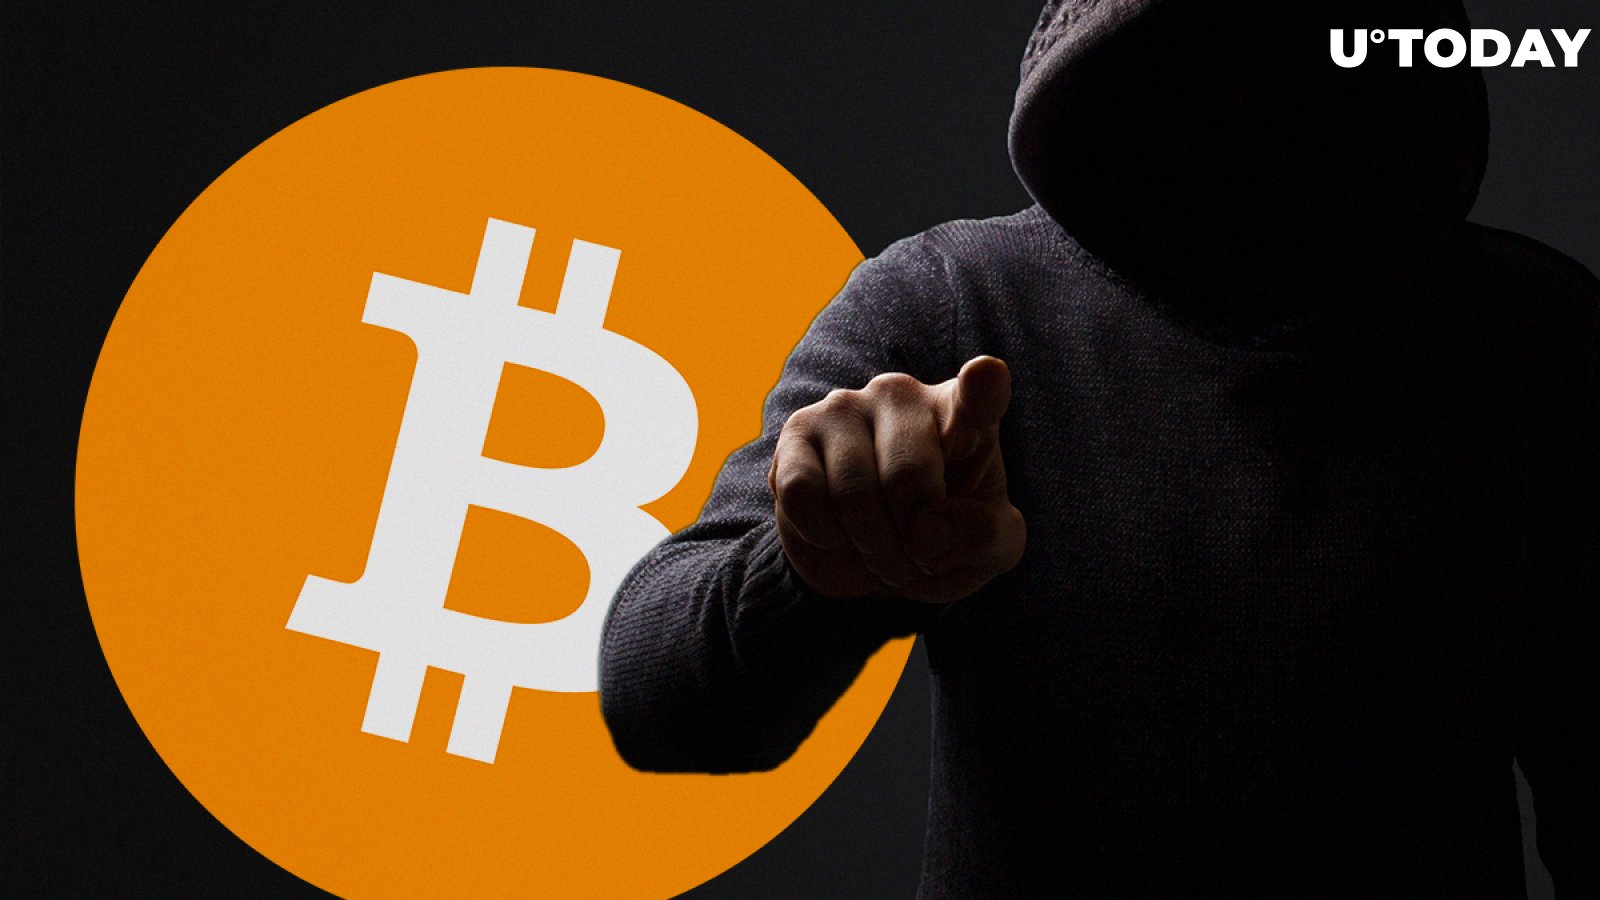 Biggest Threat to Bitcoin (BTC) Revealed in New Poll